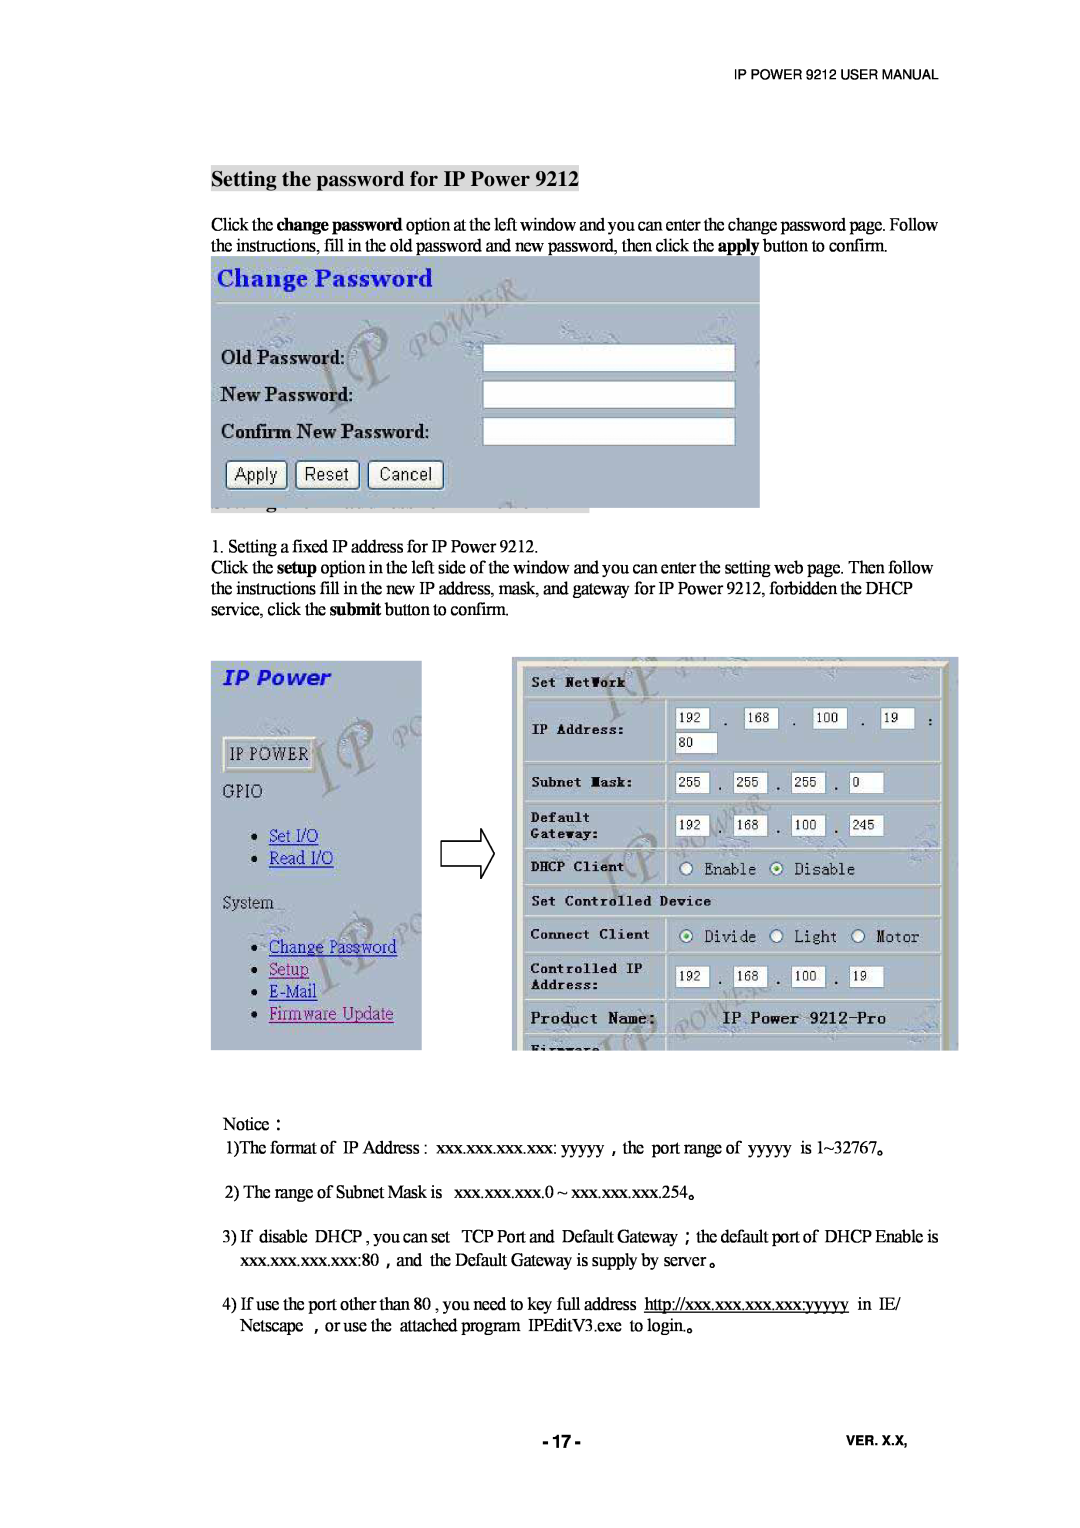 New Media Technology 9212 manual Setting the password for IP Power, Setting the IP address for IP Power 